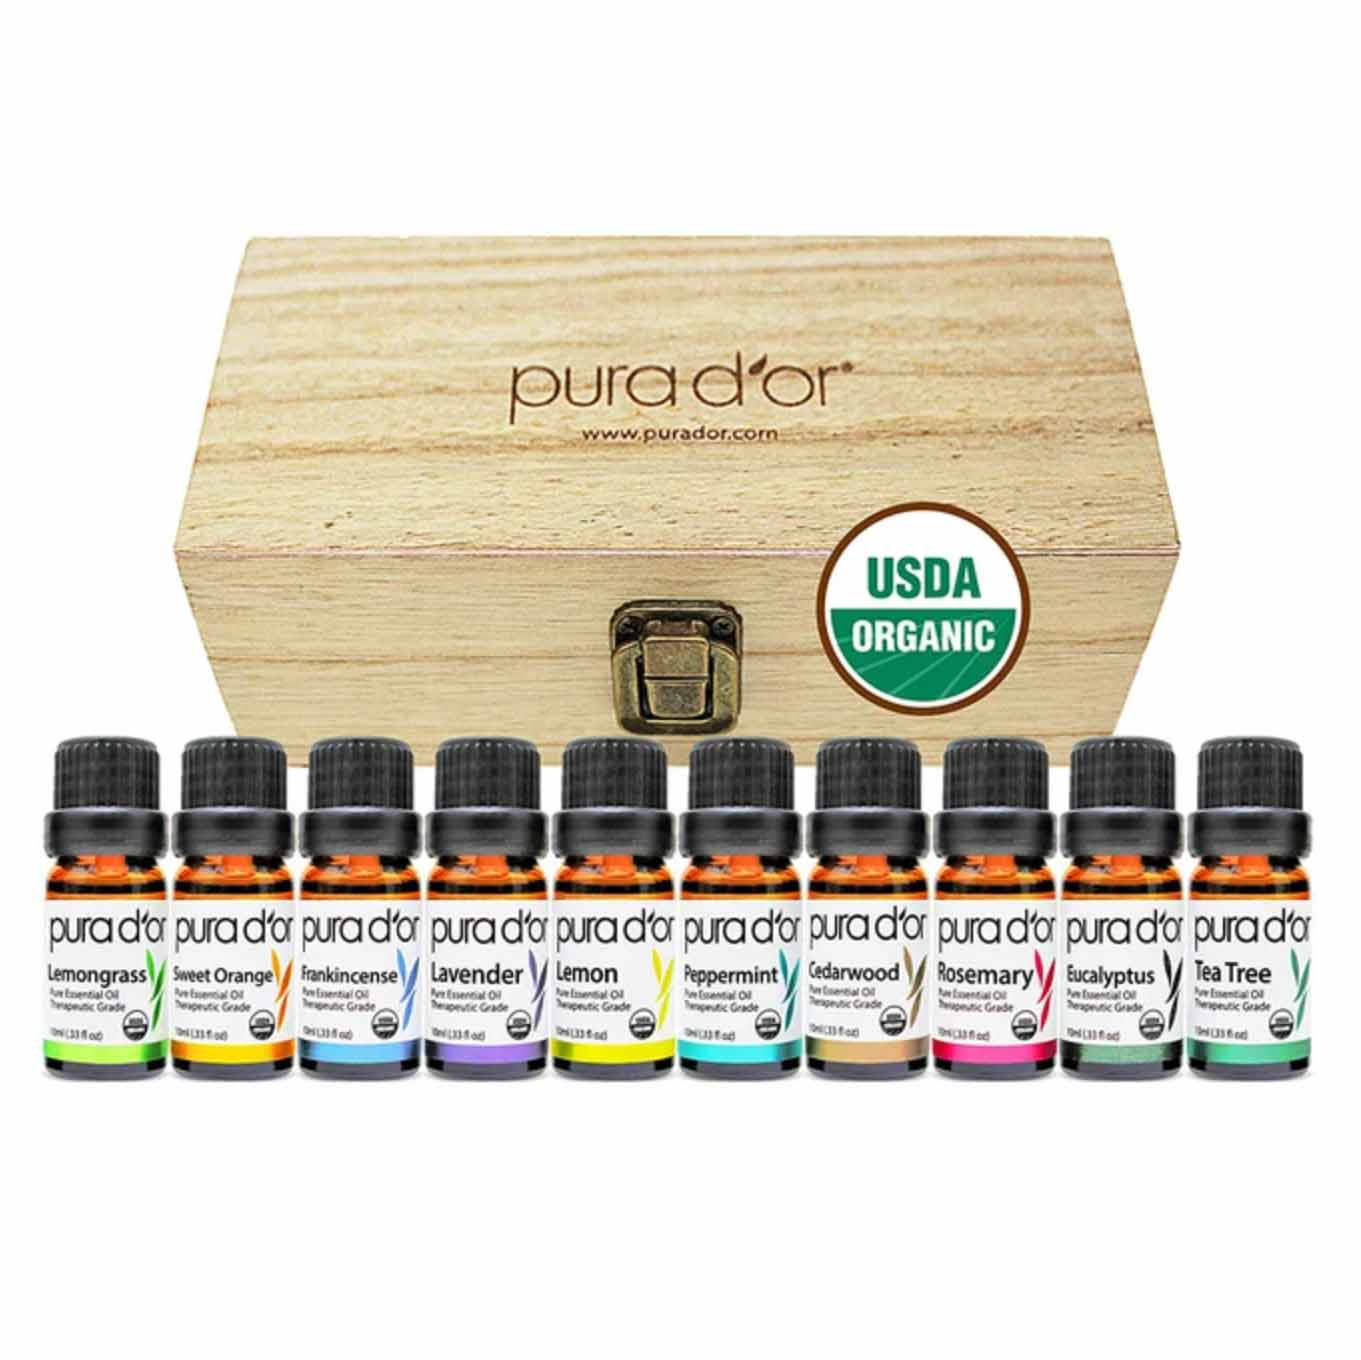 Sets of 10 essential oils and wooden box